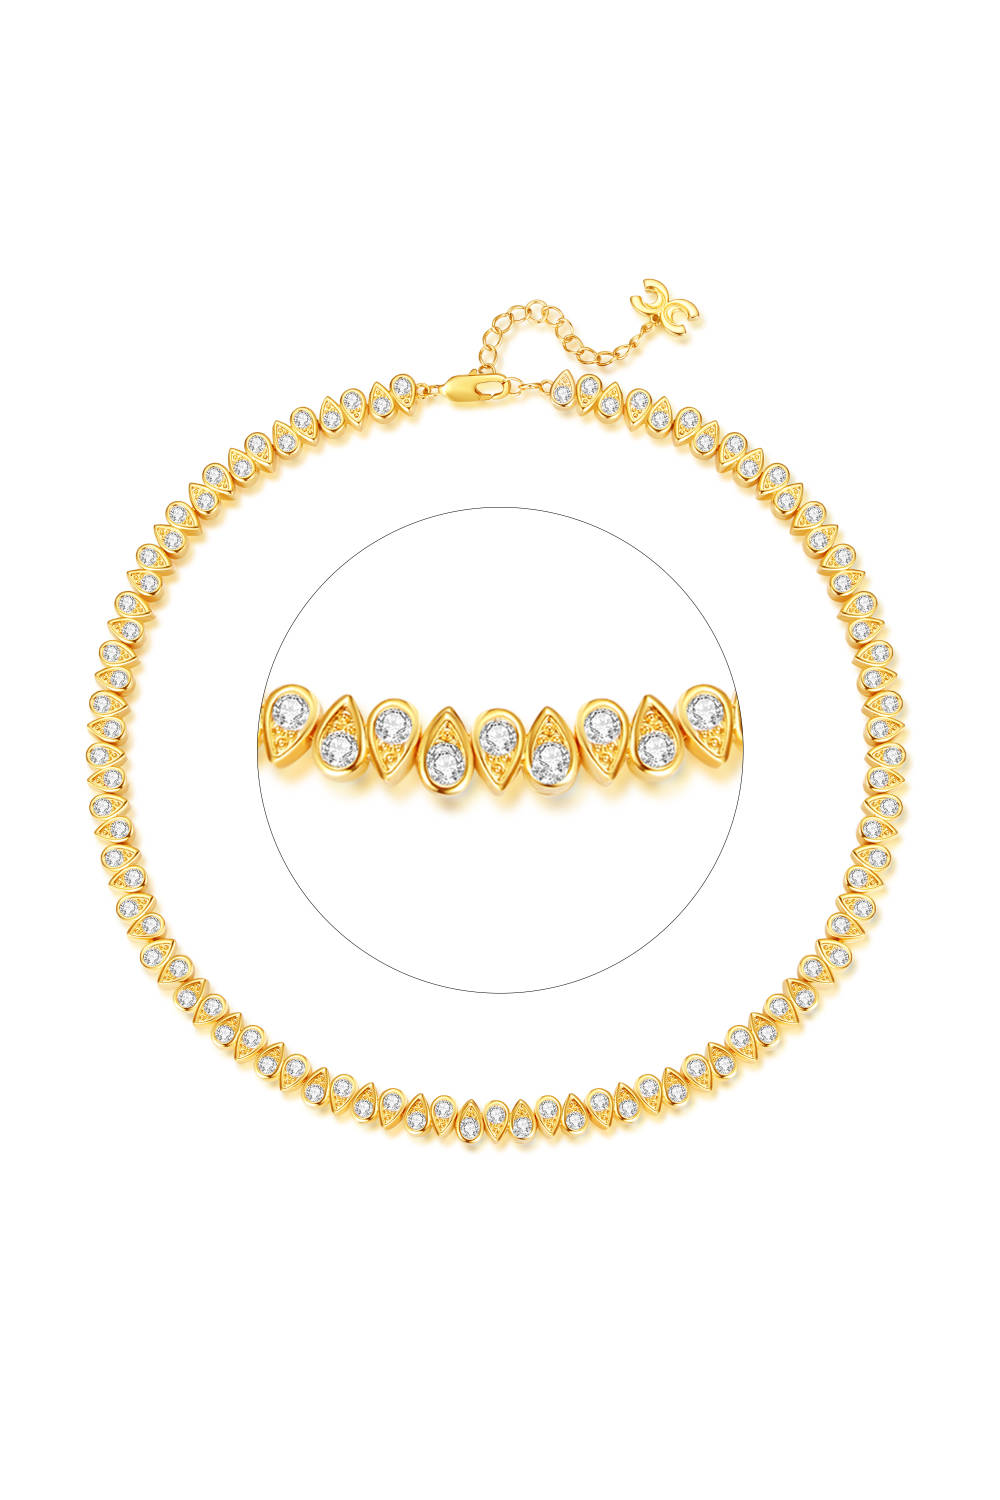 Classicharms-Gold Tear Shaped Zirconia Tennis Necklace